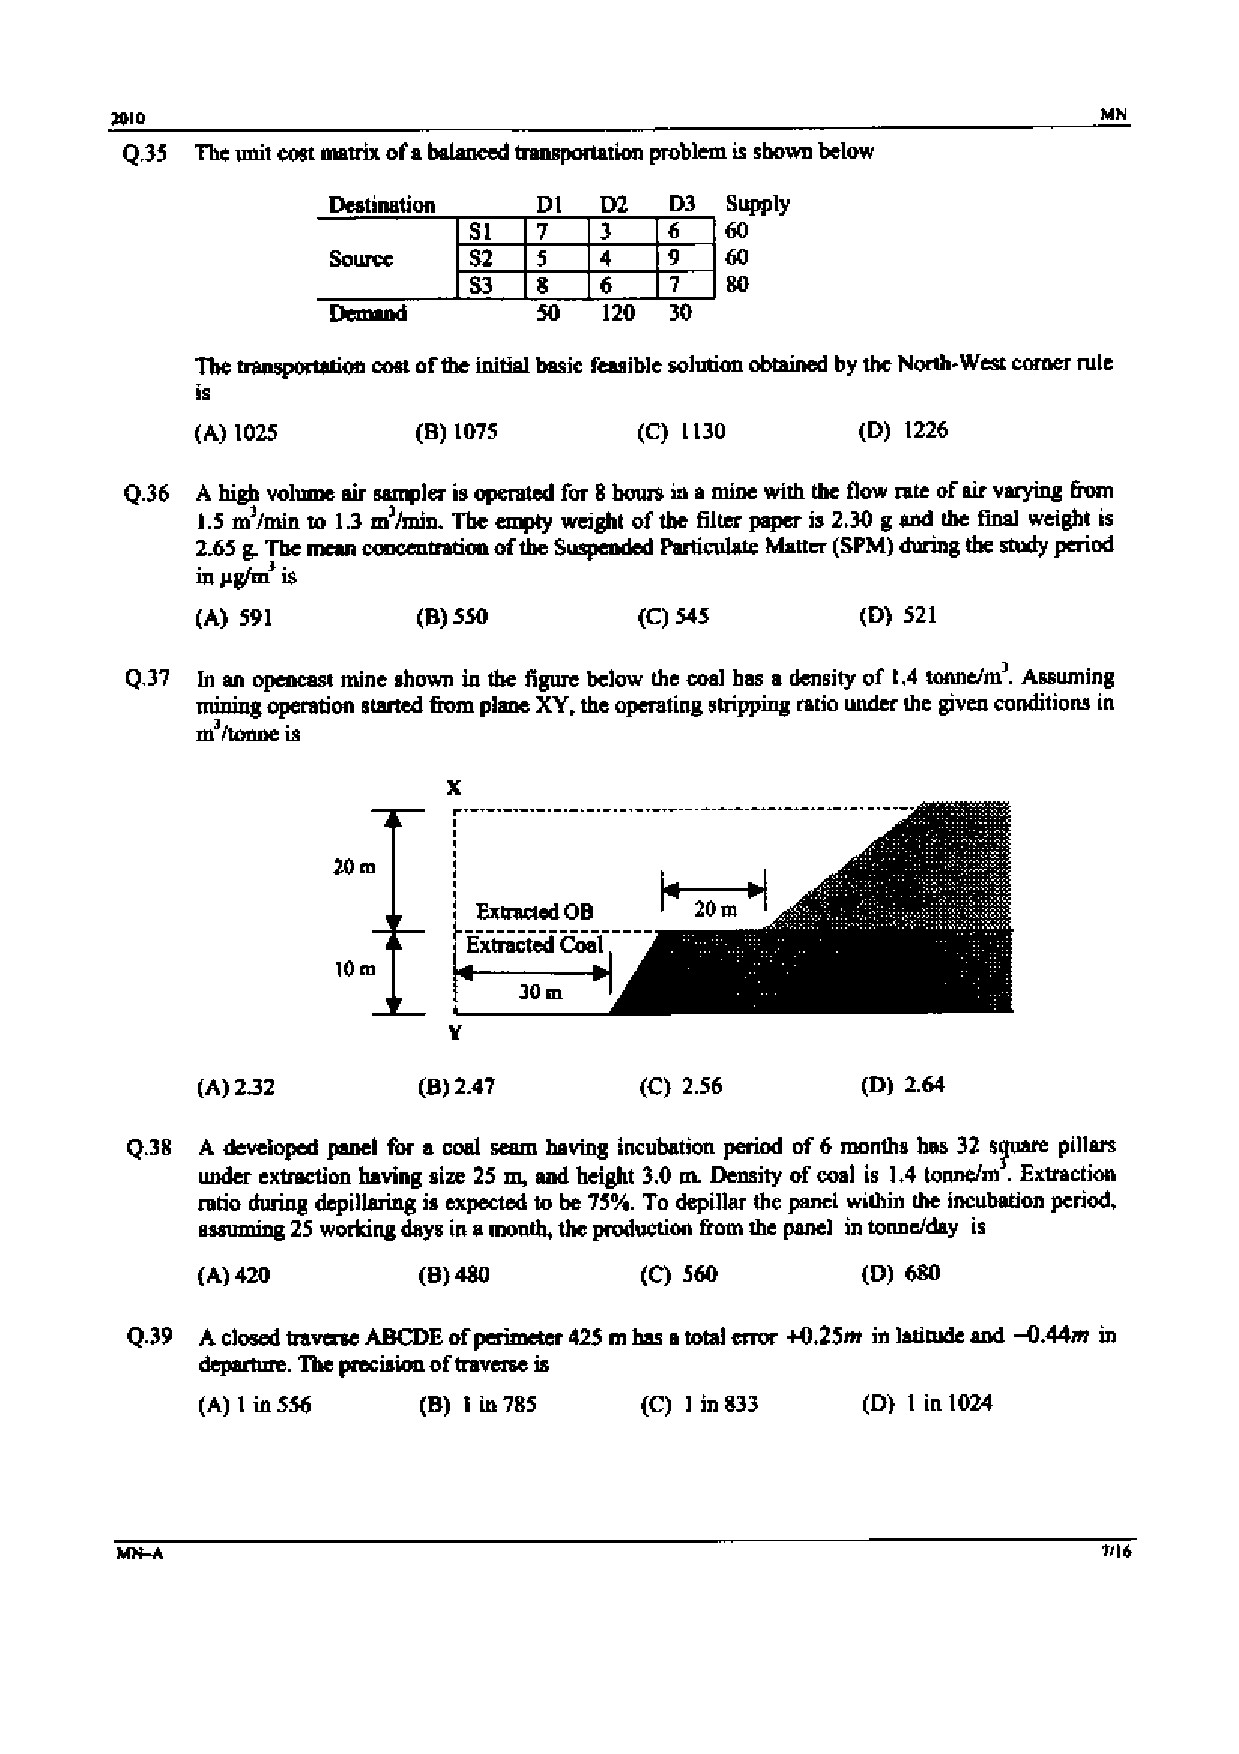 GATE Exam Question Paper 2010 Mining Engineering 7